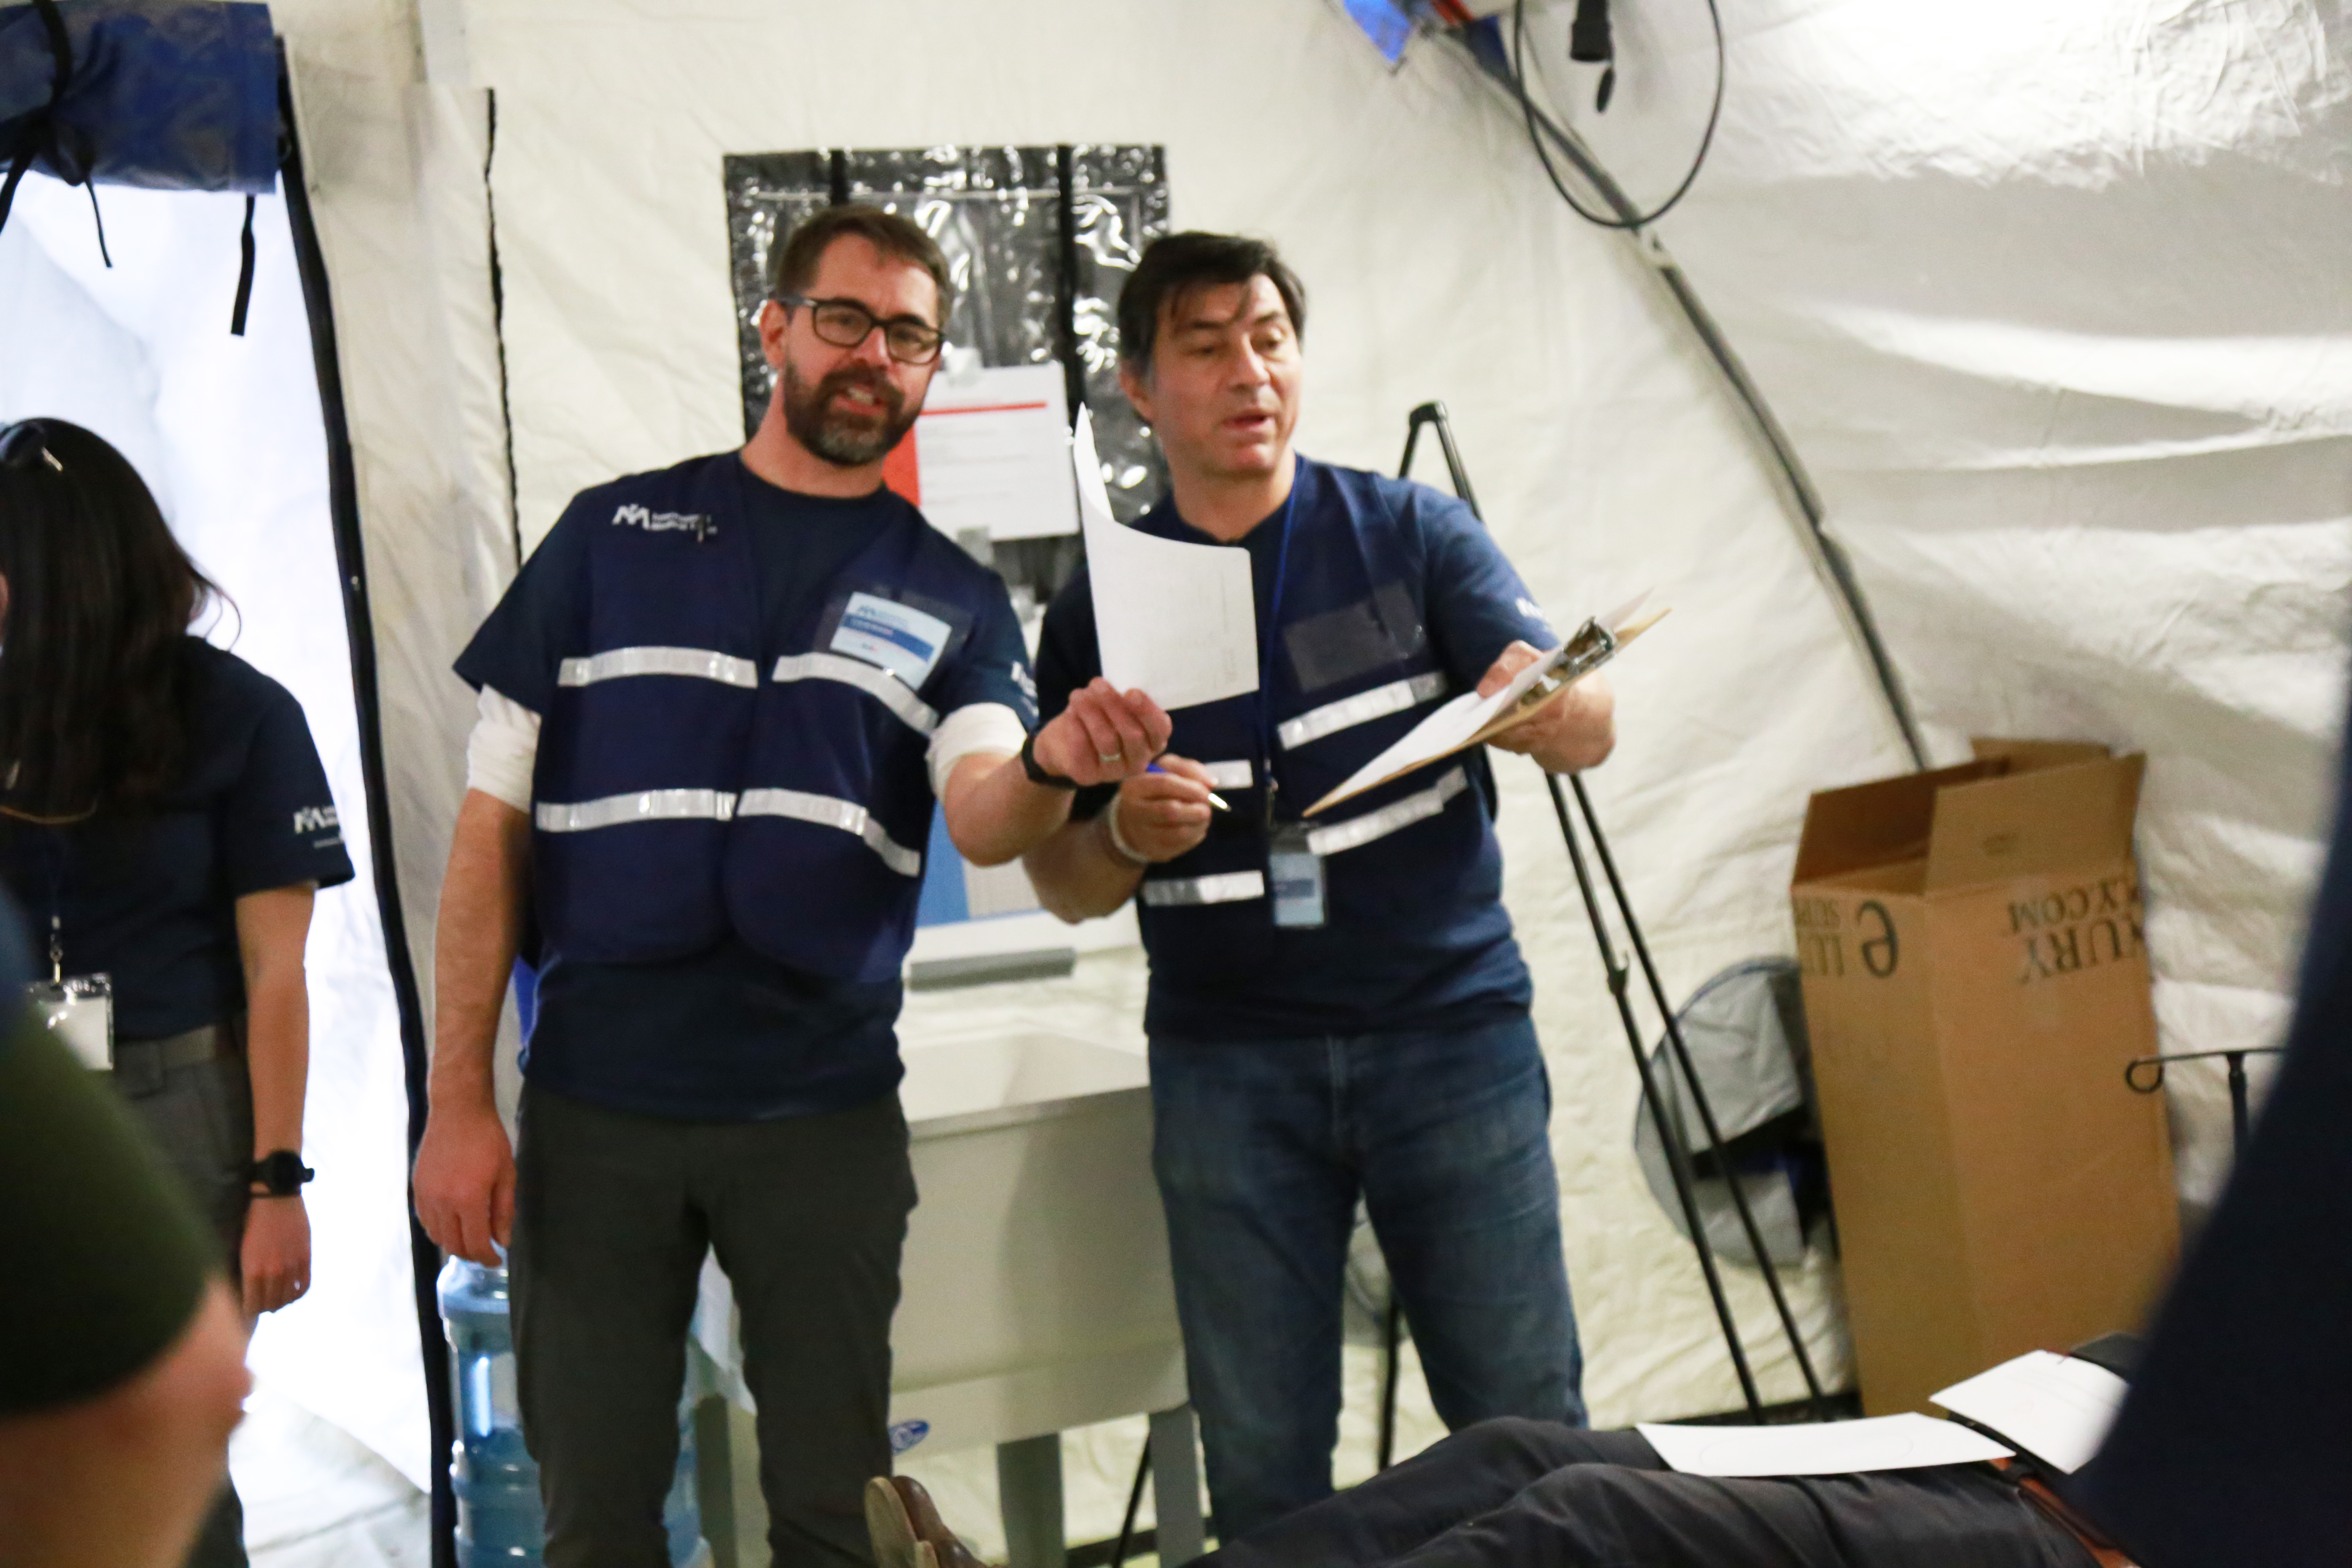 Dr. Colin Bucks (L), Clinical Assistant Professor, Emergency Medicine, Stanford, and Dr. Hernando Garzon (R), Global Health Program Director, Kaiser Permanente, participate in the field hospital simulation.